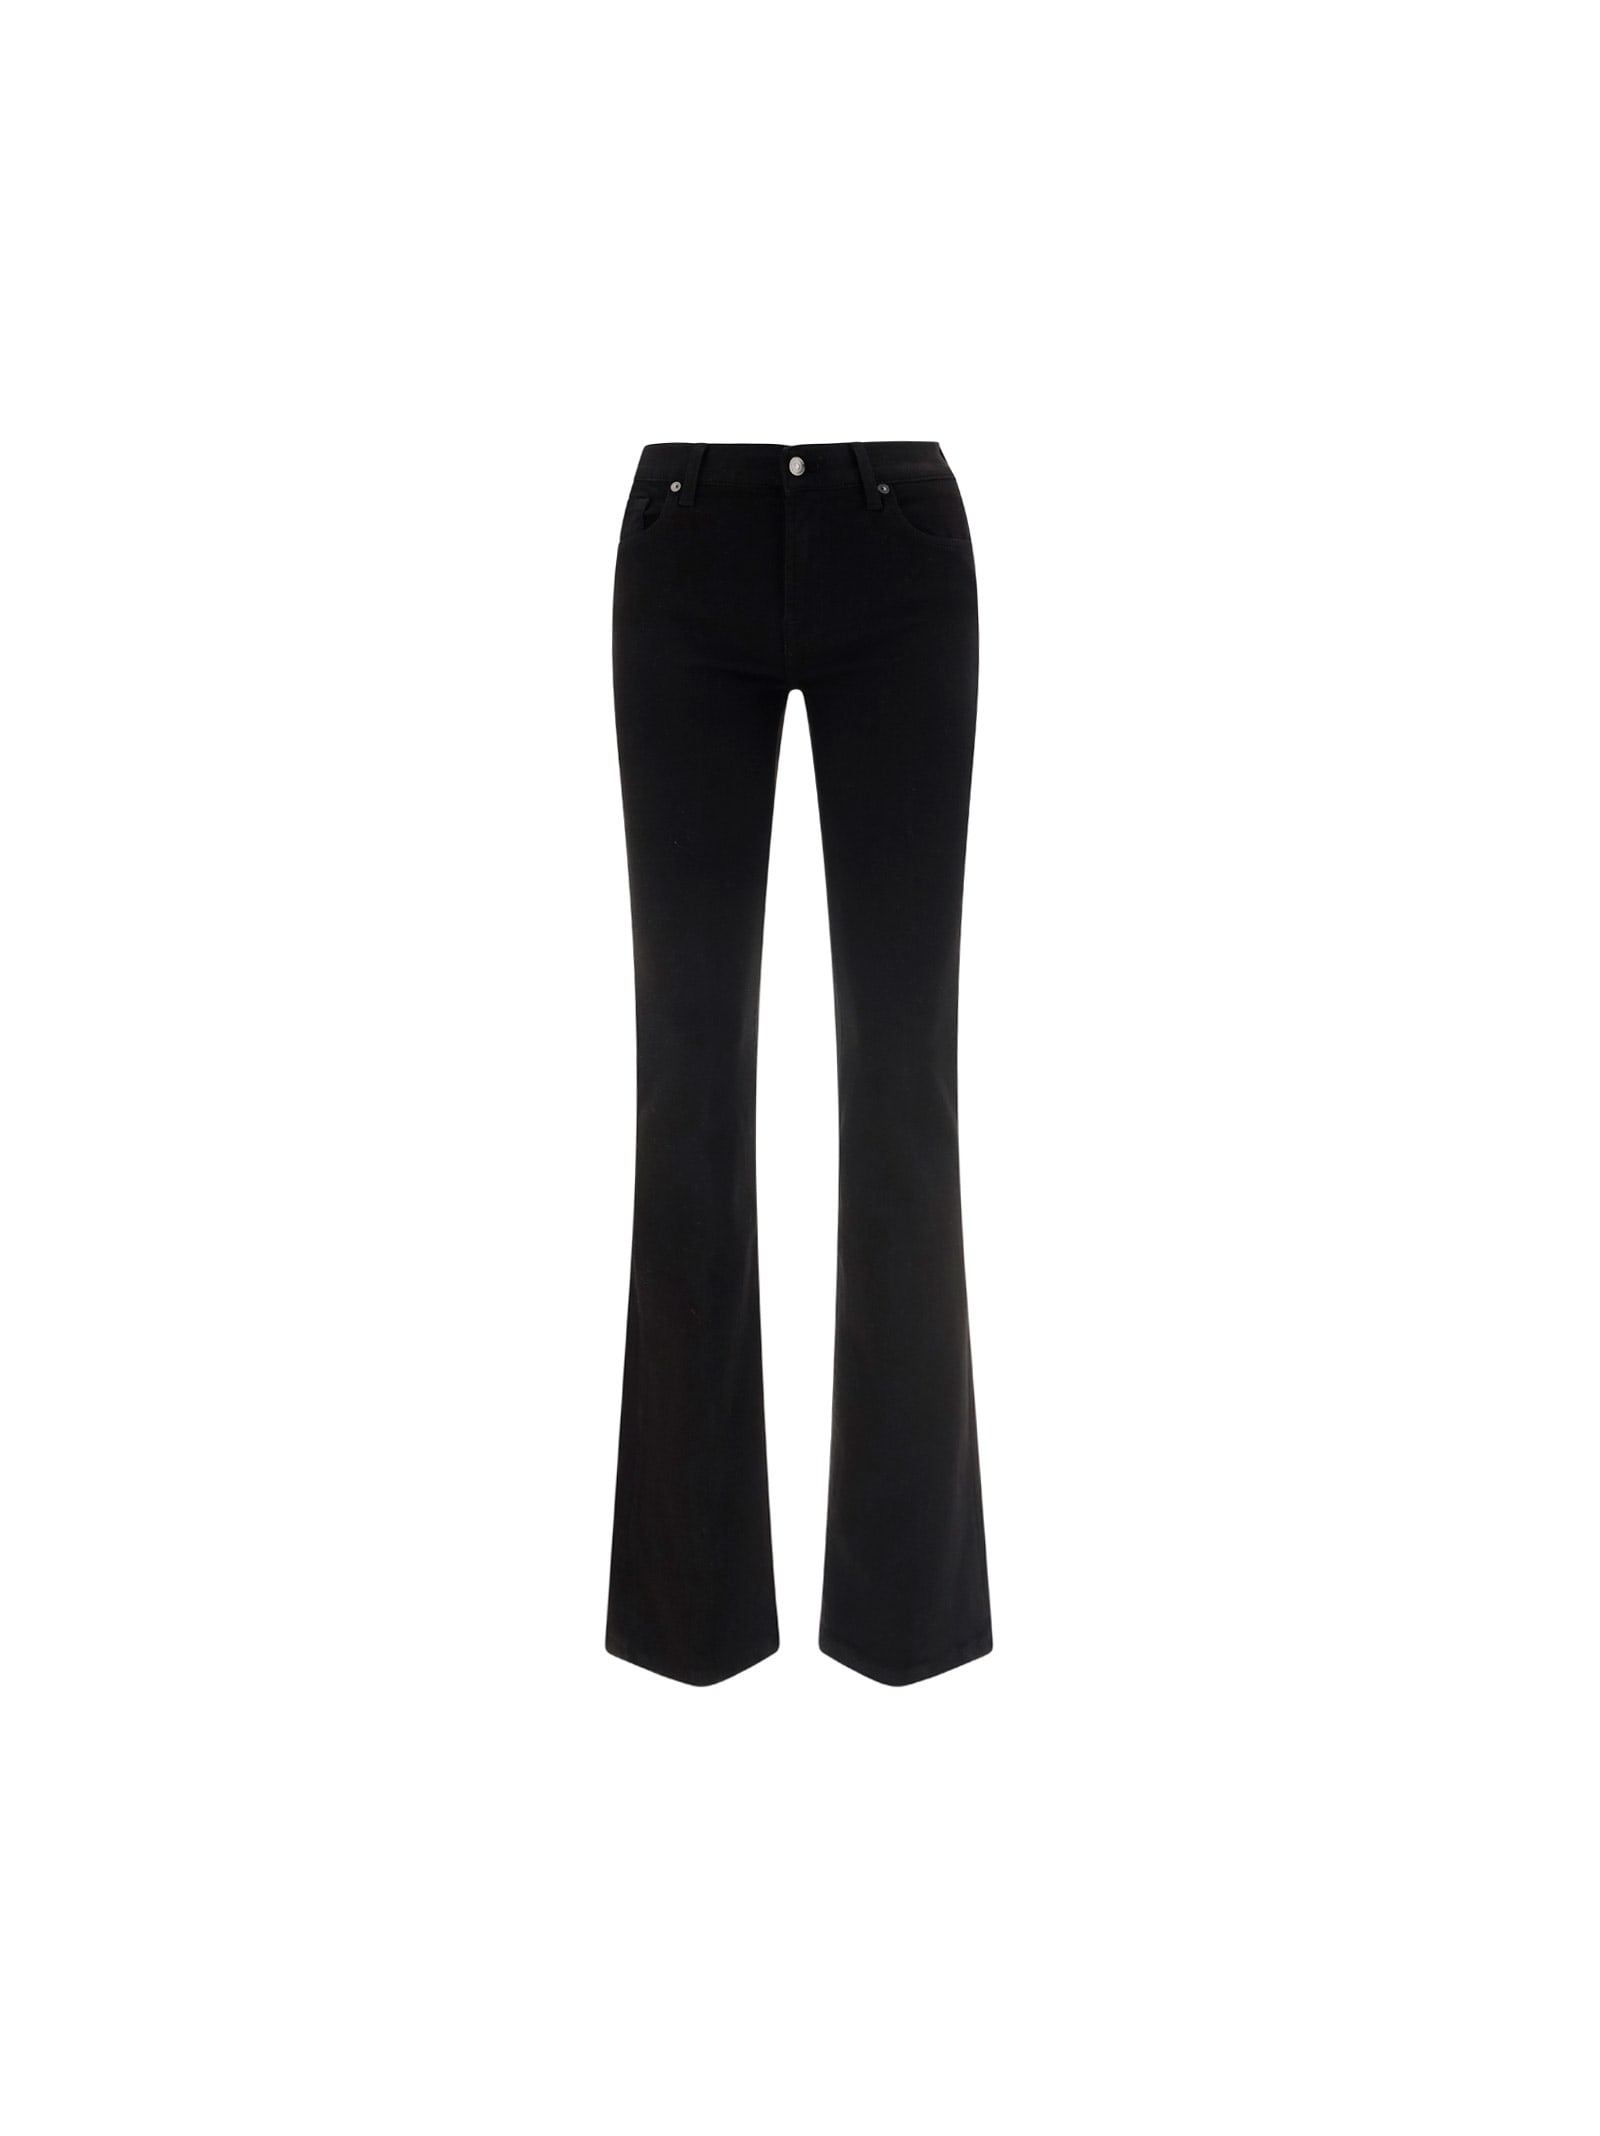 7 For All Mankind Soho Night Jeans